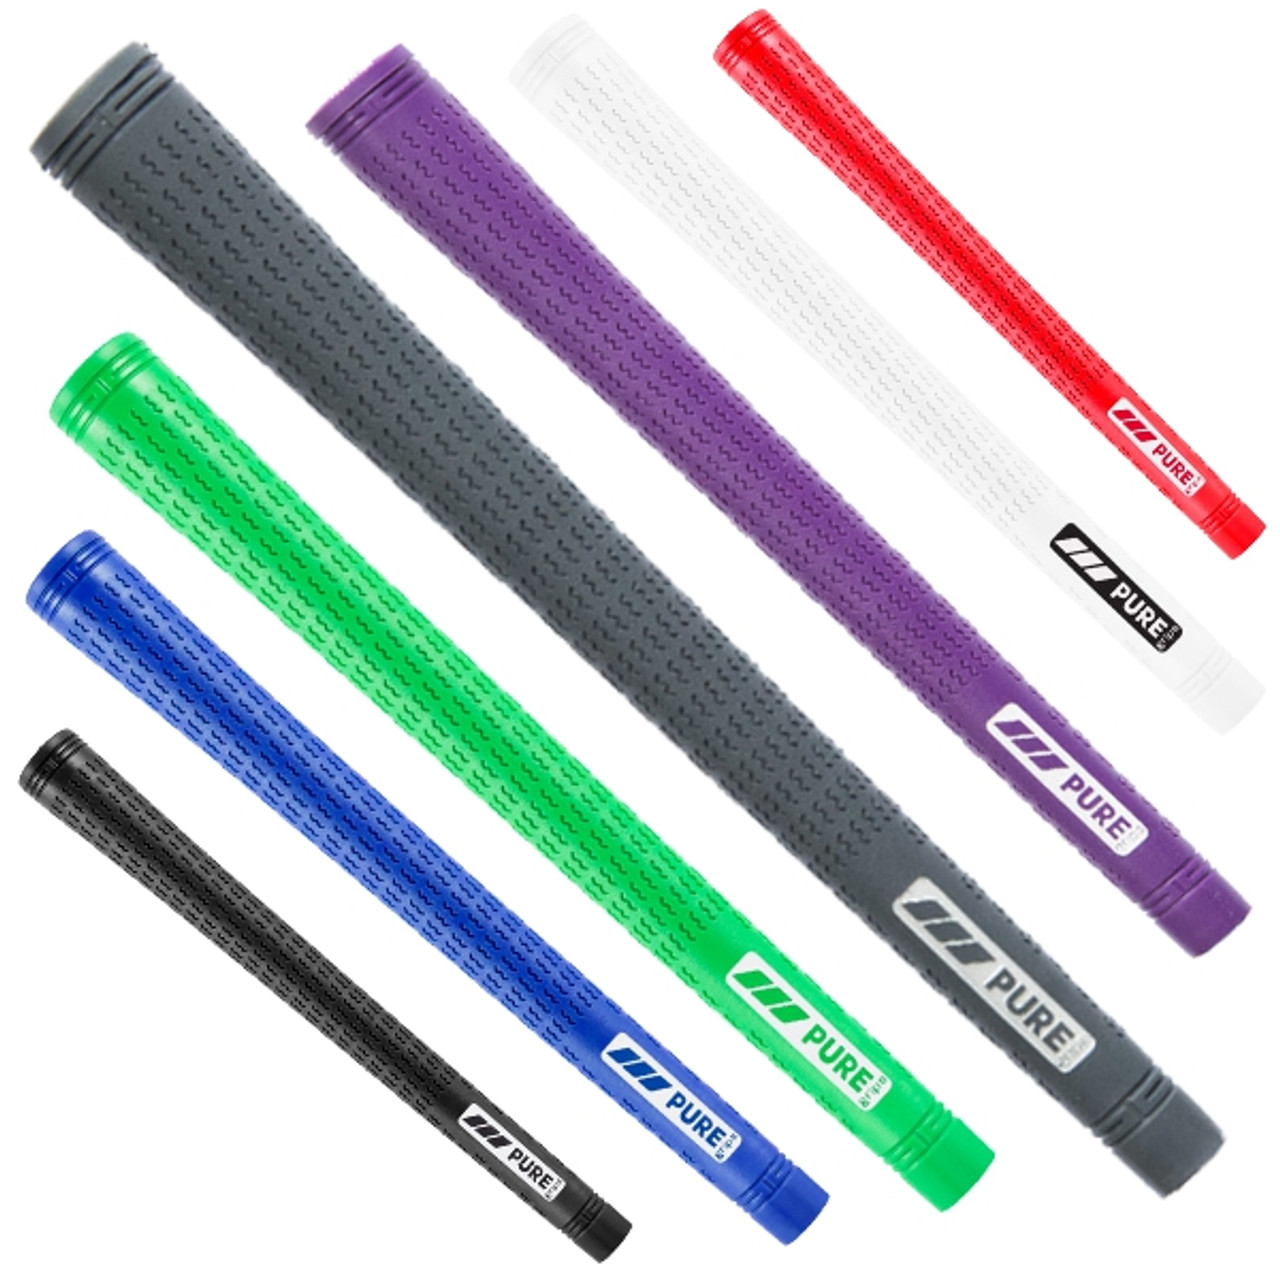 PURE Pro Golf Grips - Handcrafted